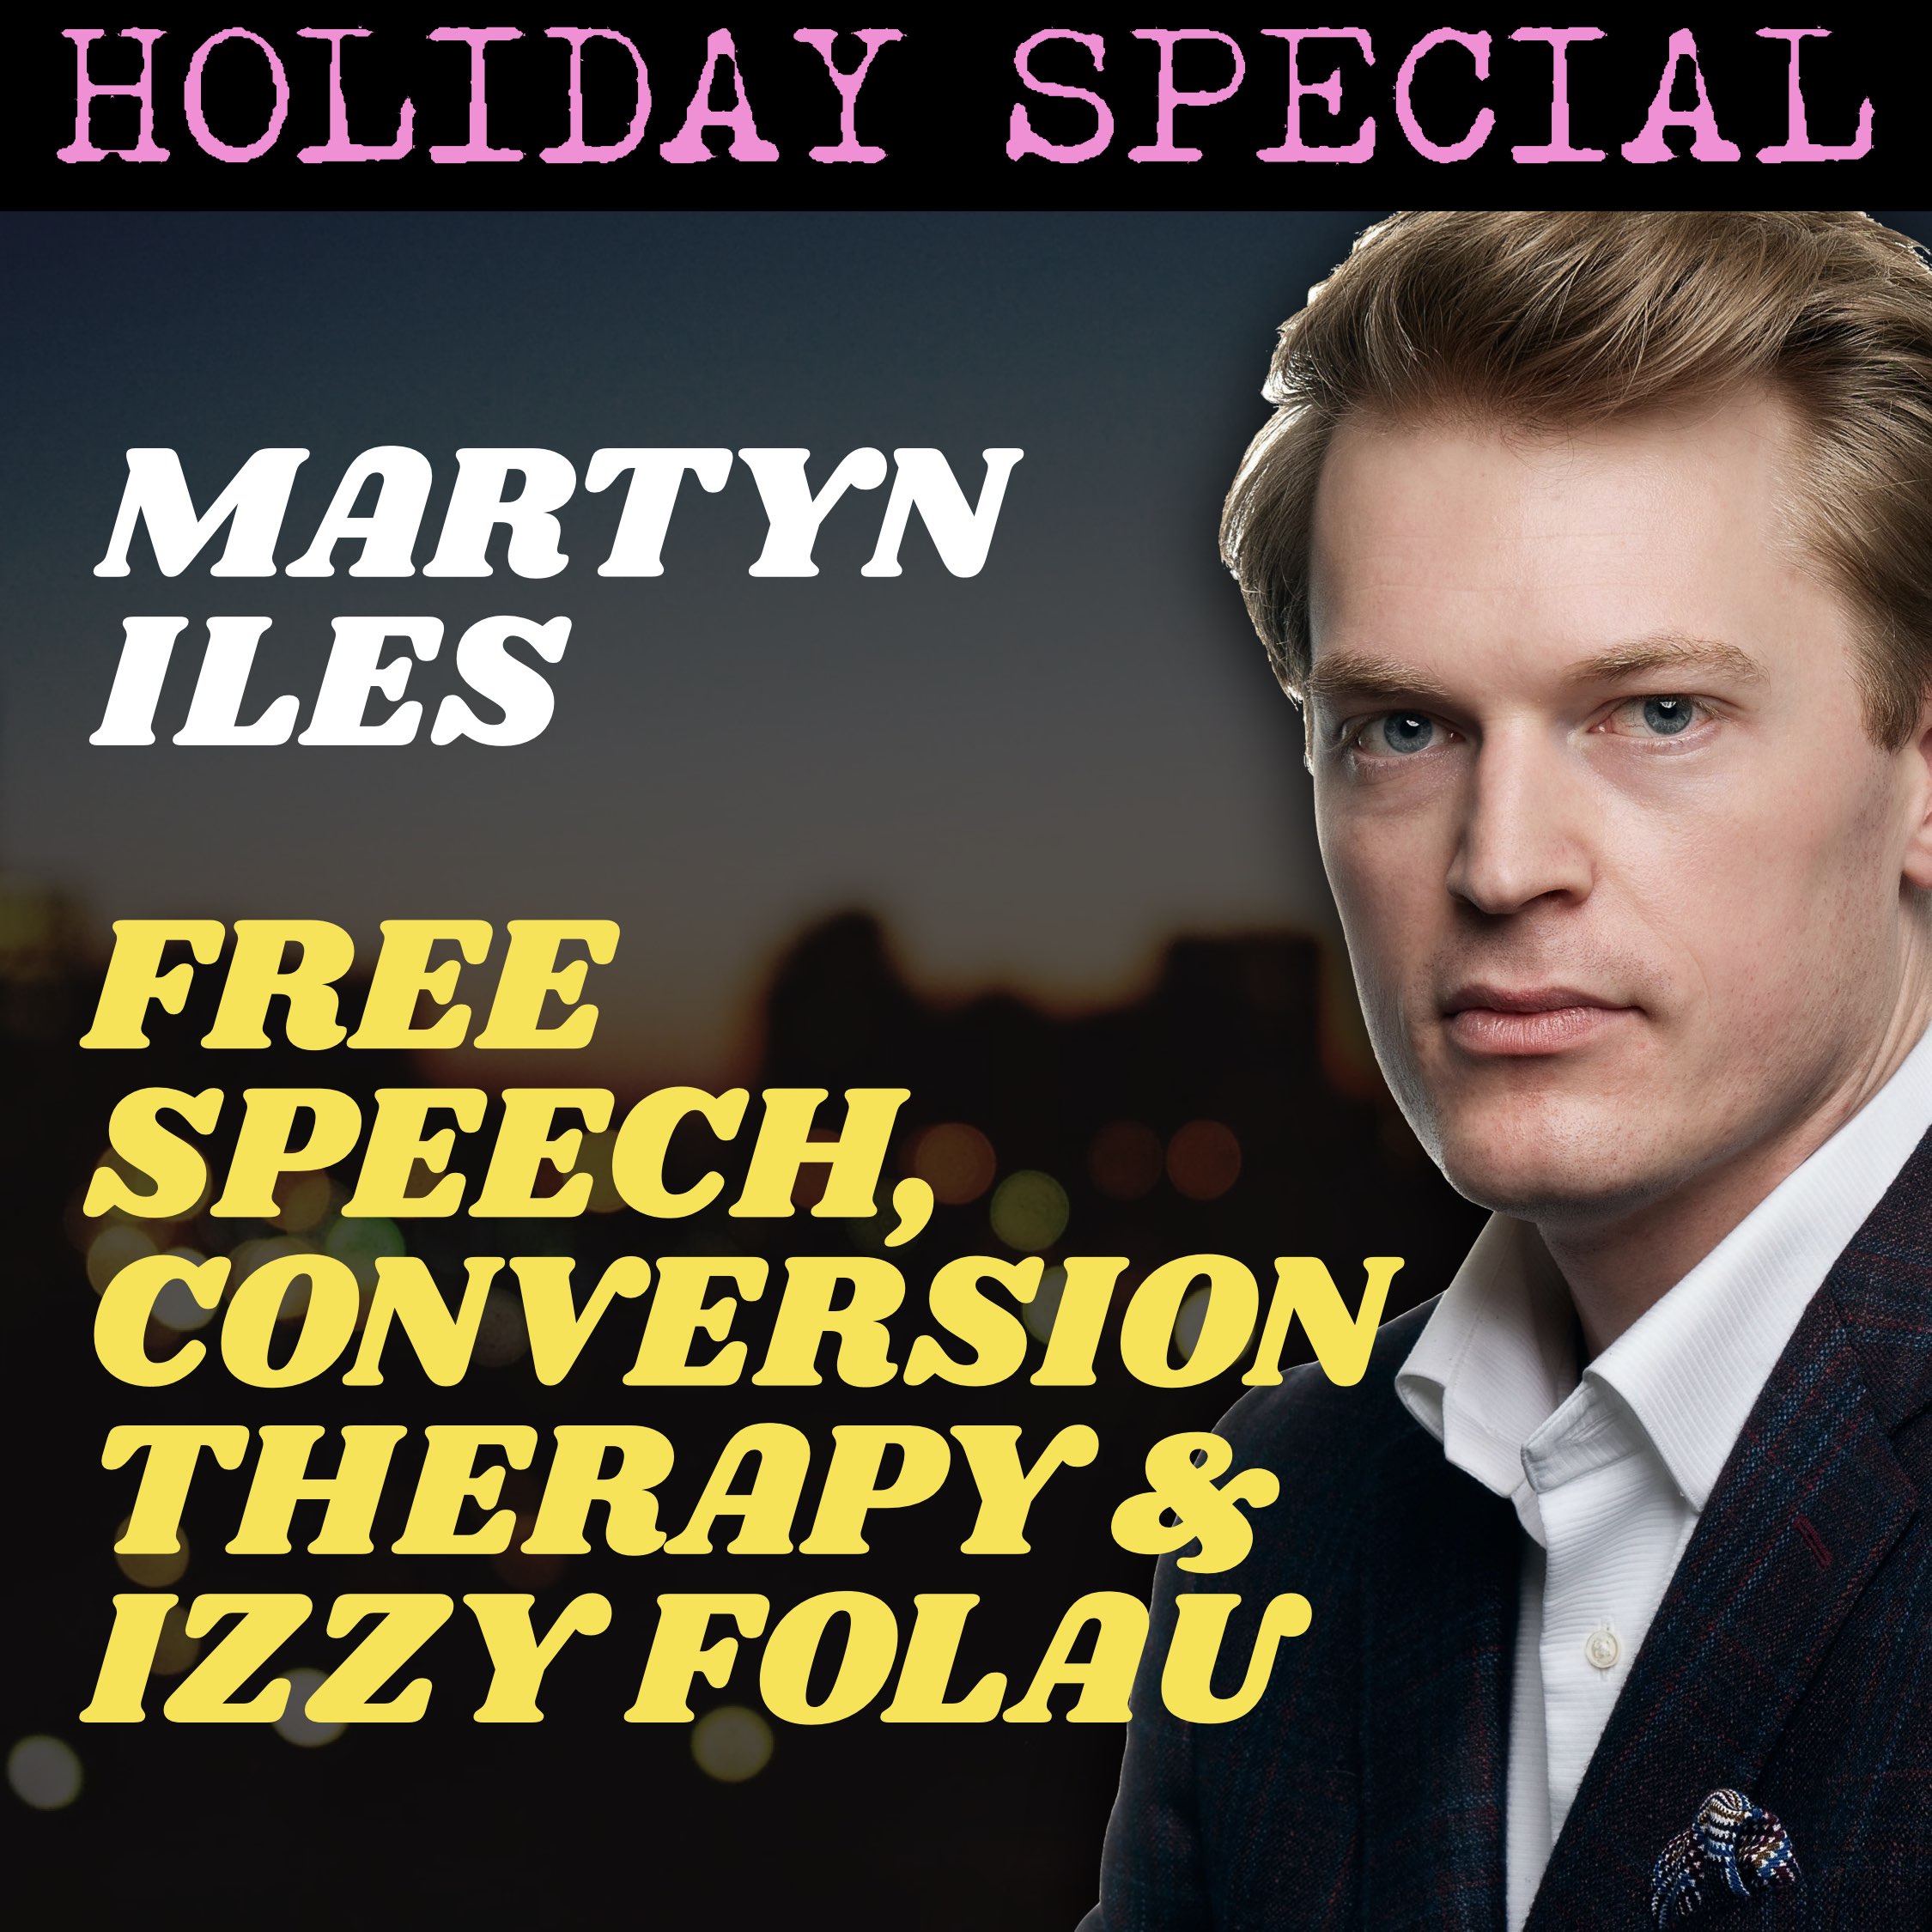 HOLIDAY SPECIAL | Martyn Iles: Free Speech, Conversion Therapy, and Israel Folau